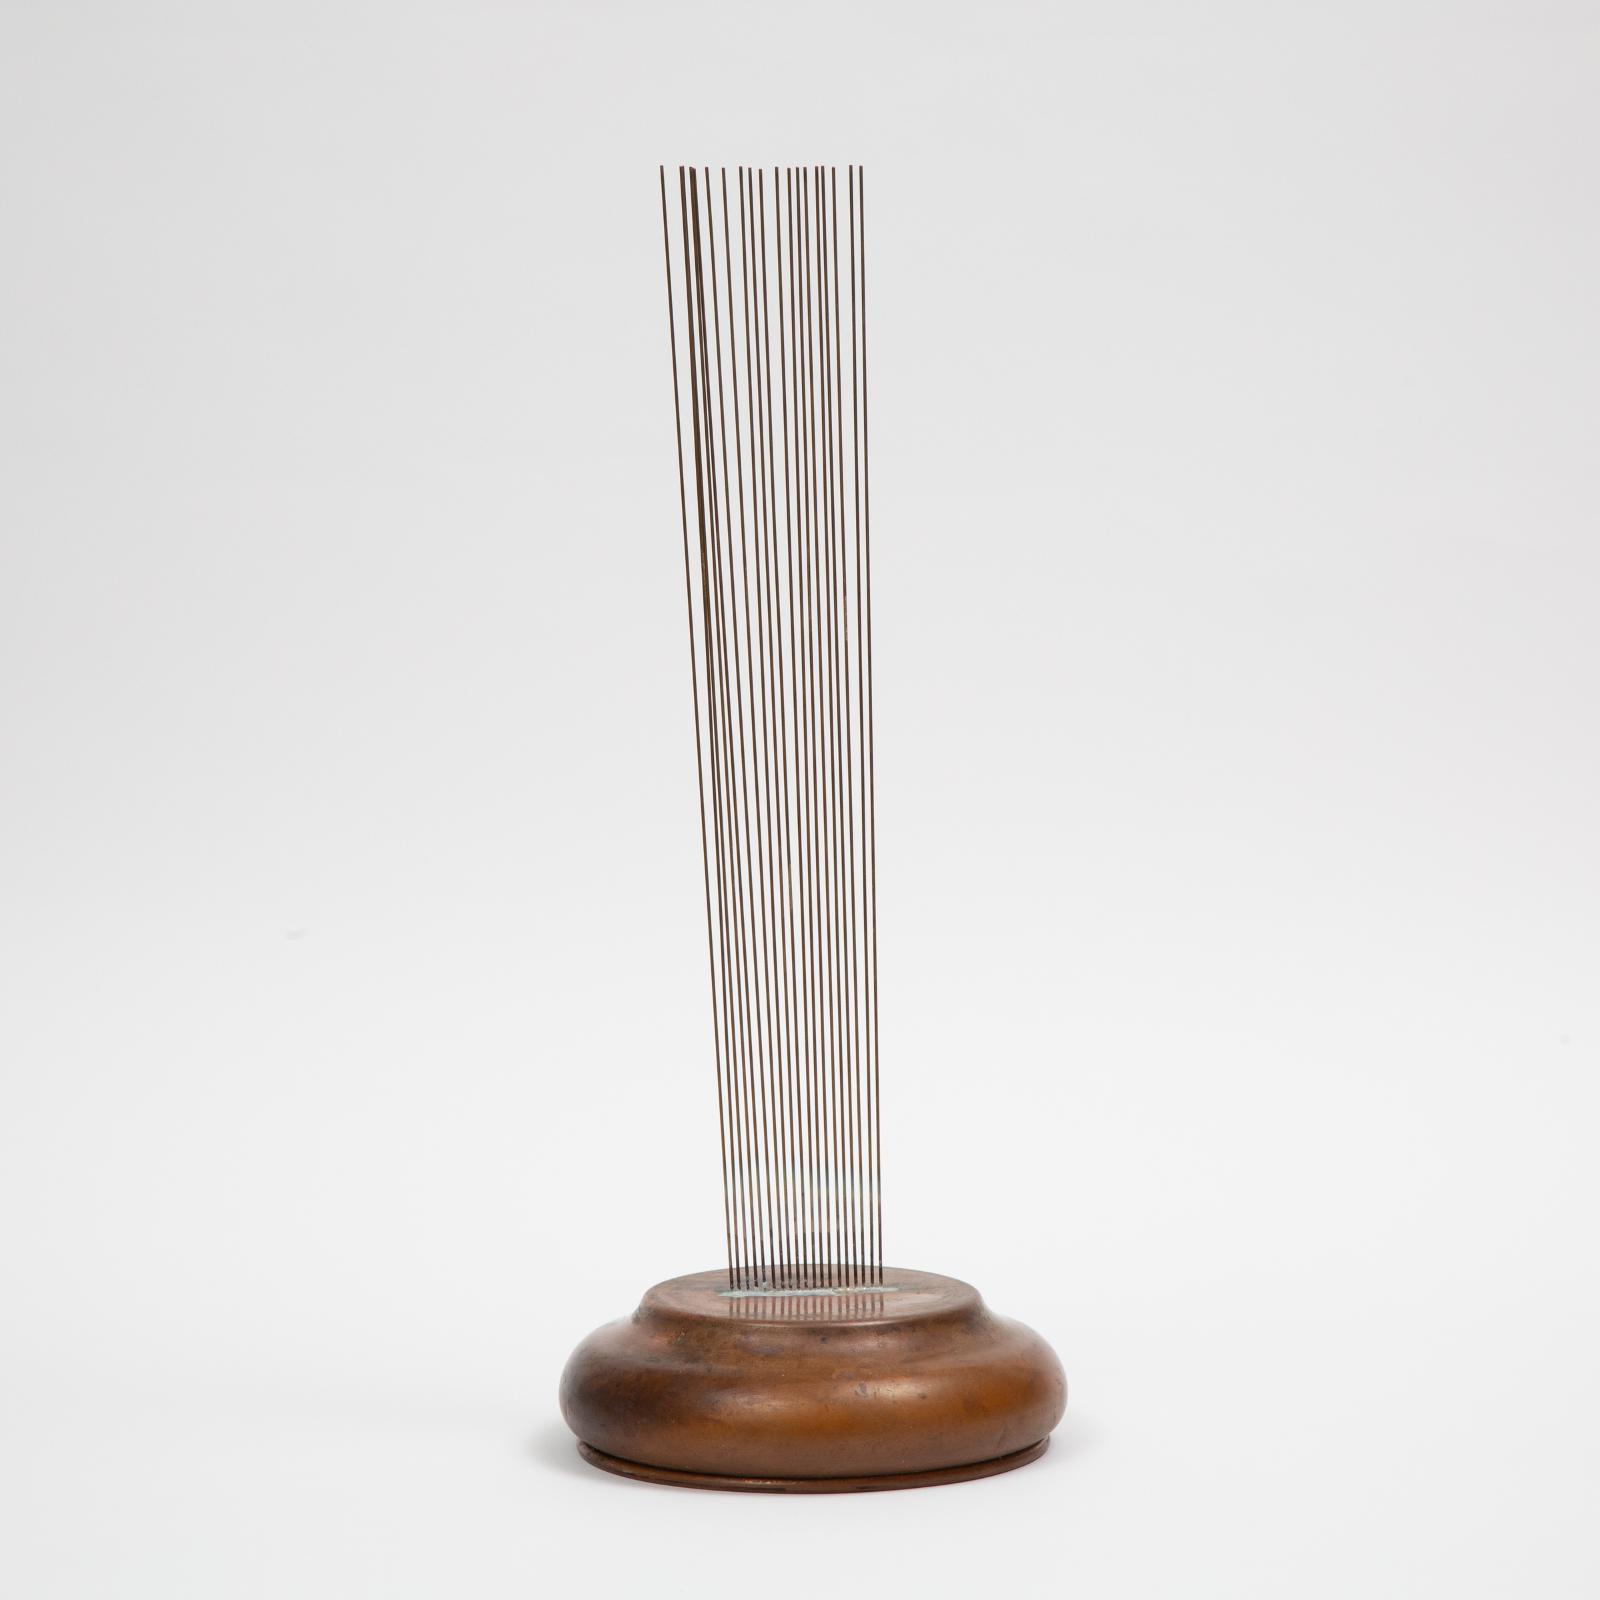 Val Bertoia (1949) - Test Model For Thomas Zung's Homage Project (B-2219), 2019